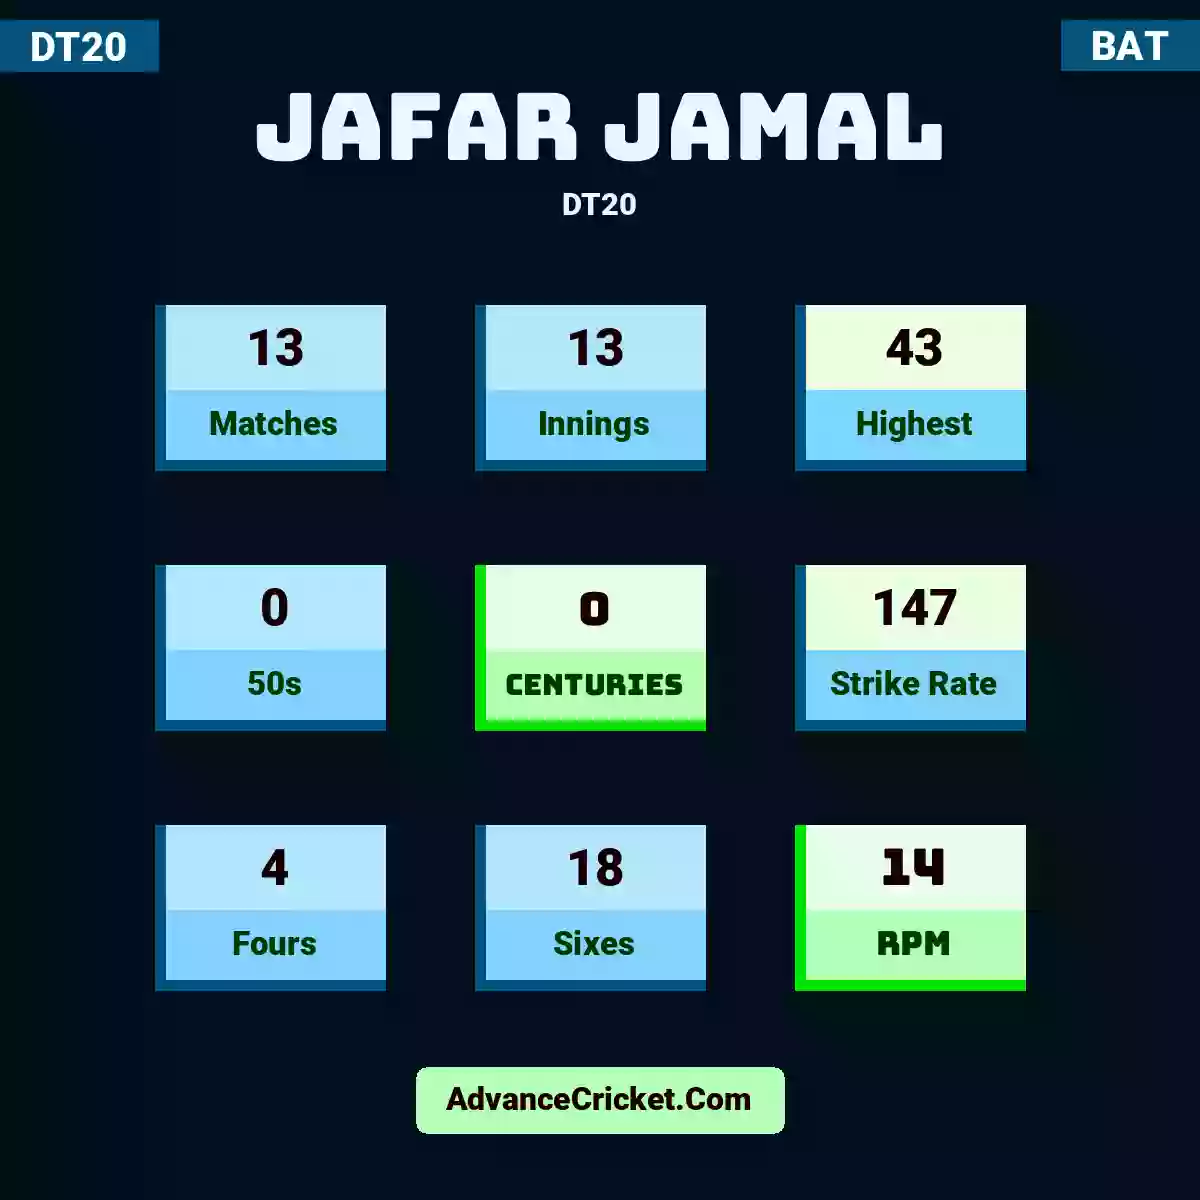 Jafar Jamal DT20 , Jafar Jamal played 13 matches, scored 43 runs as highest, 0 half-centuries, and 0 centuries, with a strike rate of 147. J.Jamal hit 4 fours and 18 sixes, with an RPM of 14.